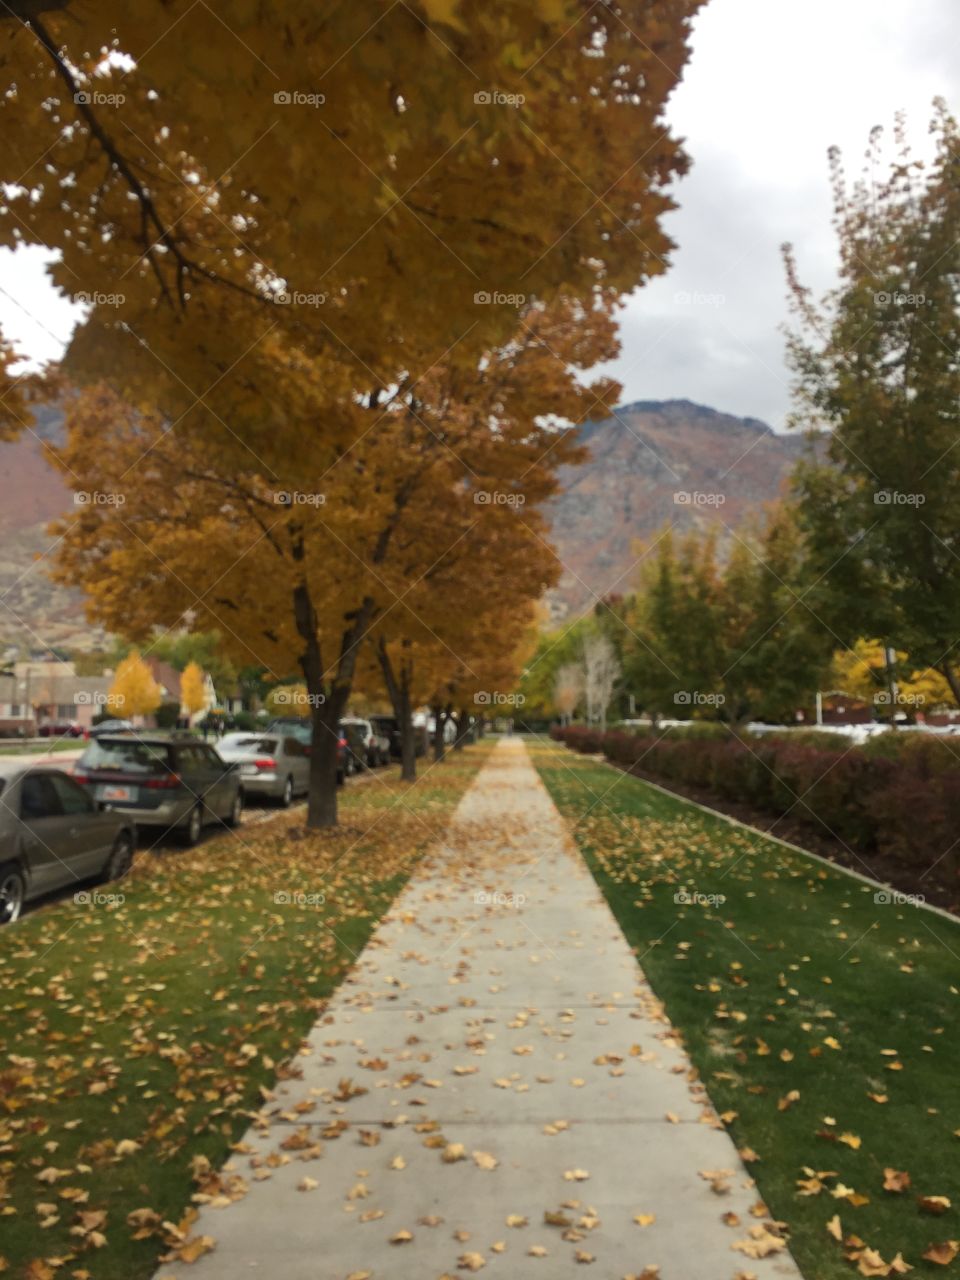 Brigham Young University’s walkways are littered with yellow leaves from fall trees // fall 2018